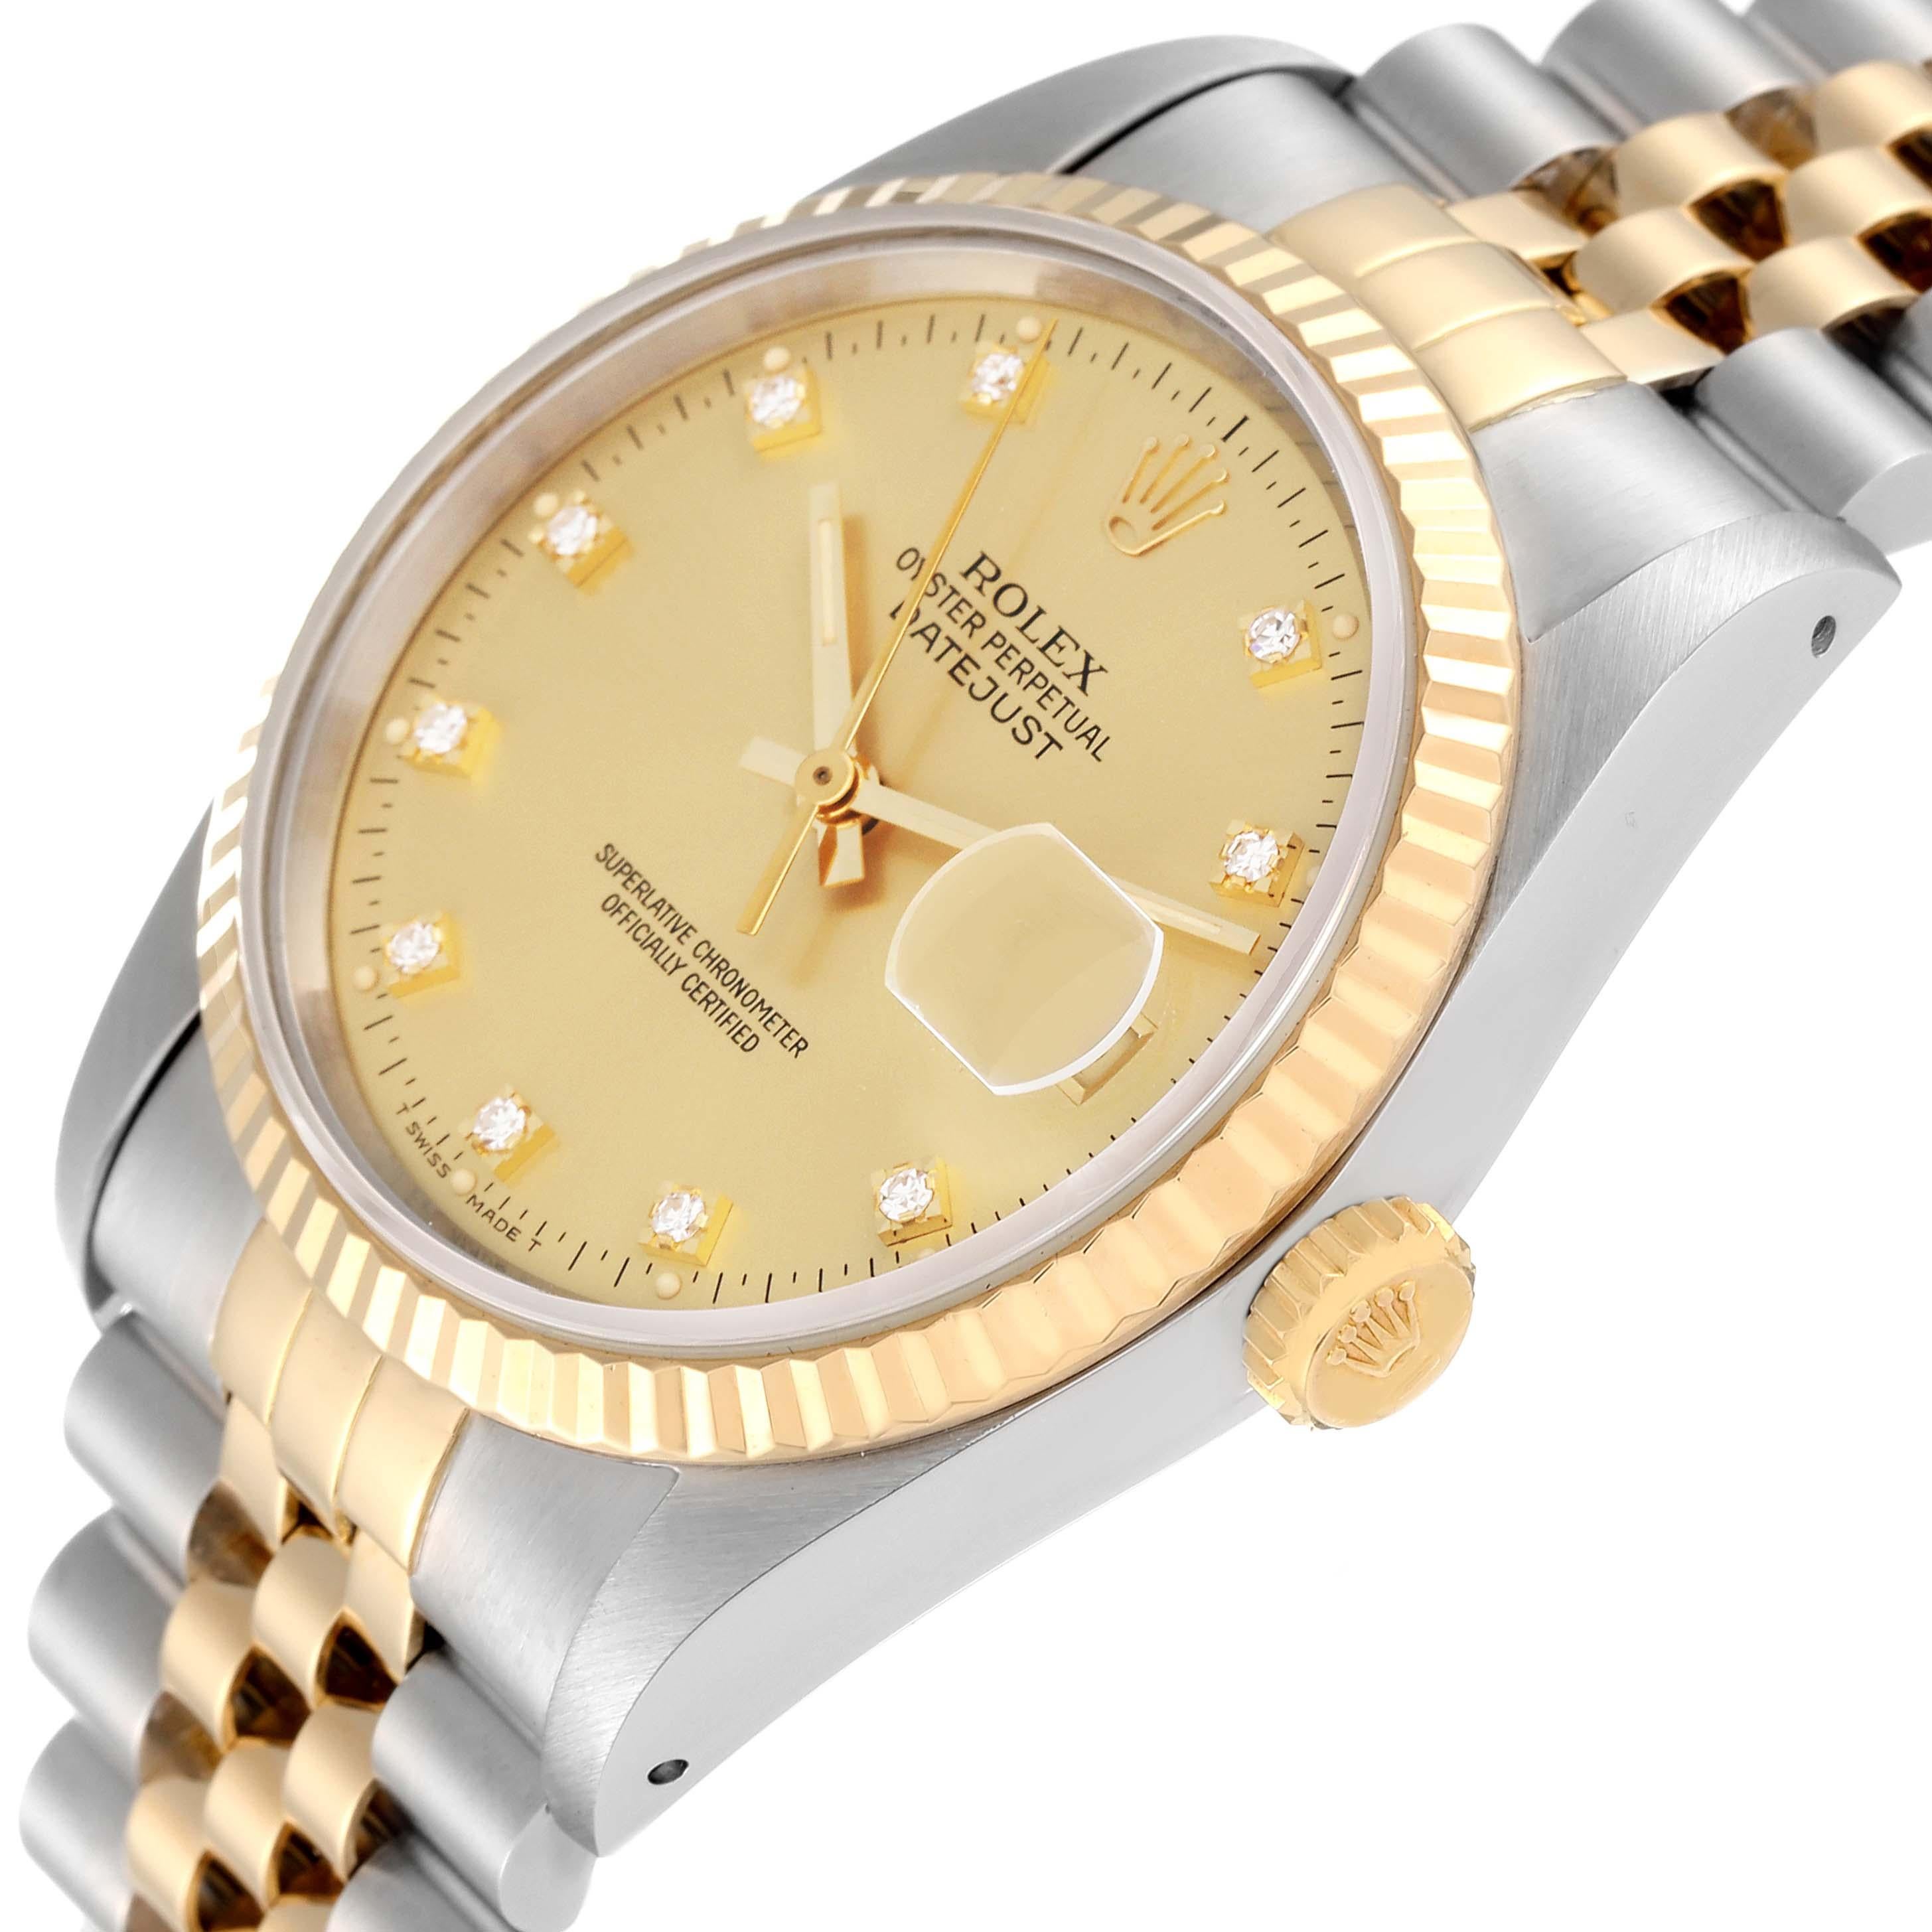 Rolex Datejust Champagne Diamond Dial Steel Yellow Gold Mens Watch 16233 1